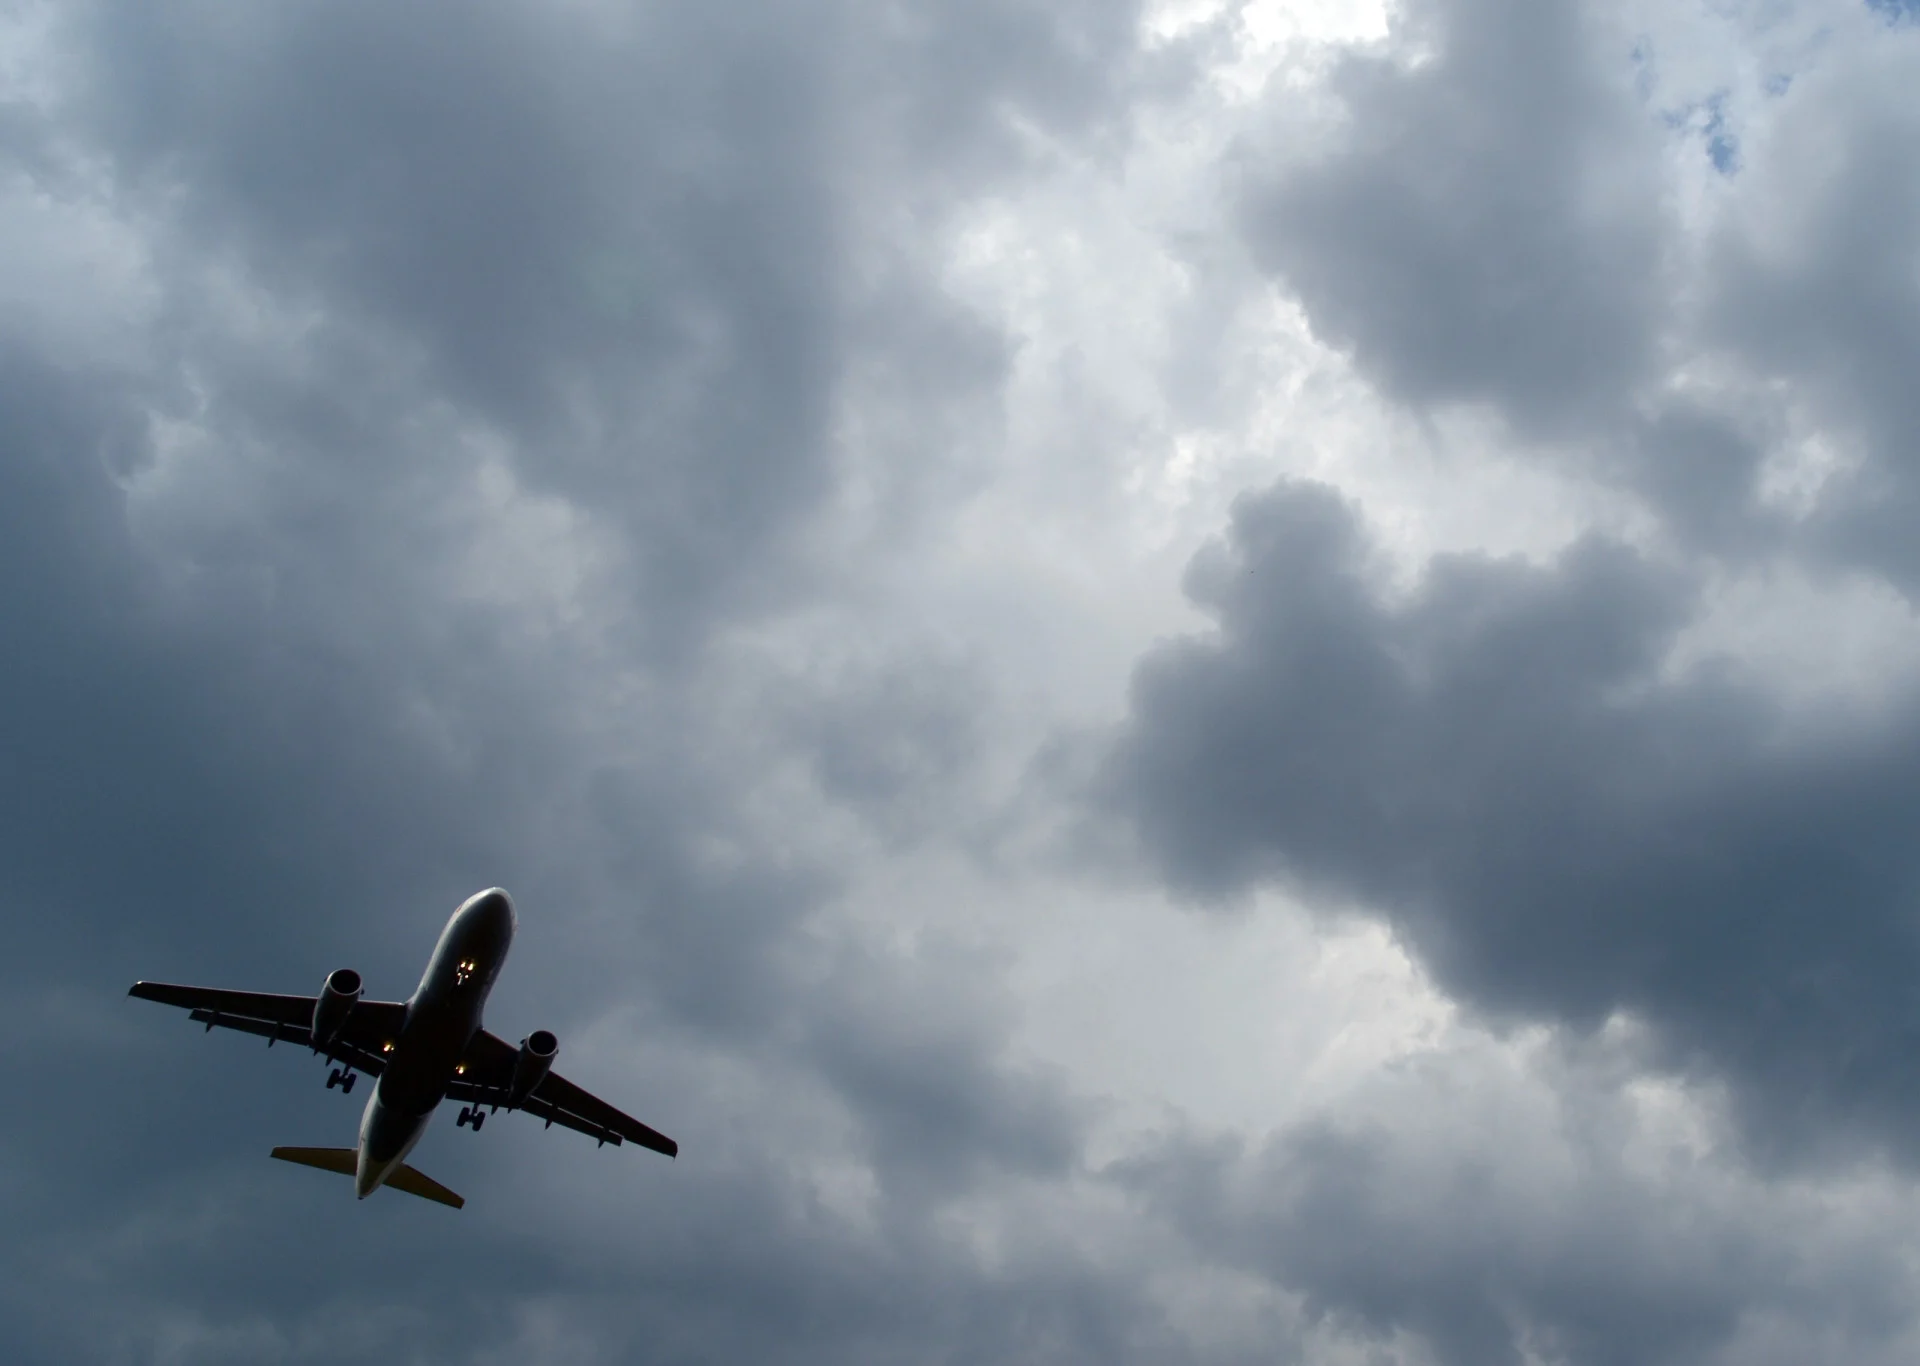 Buckle up: Severe turbulence is on the rise. Here's why